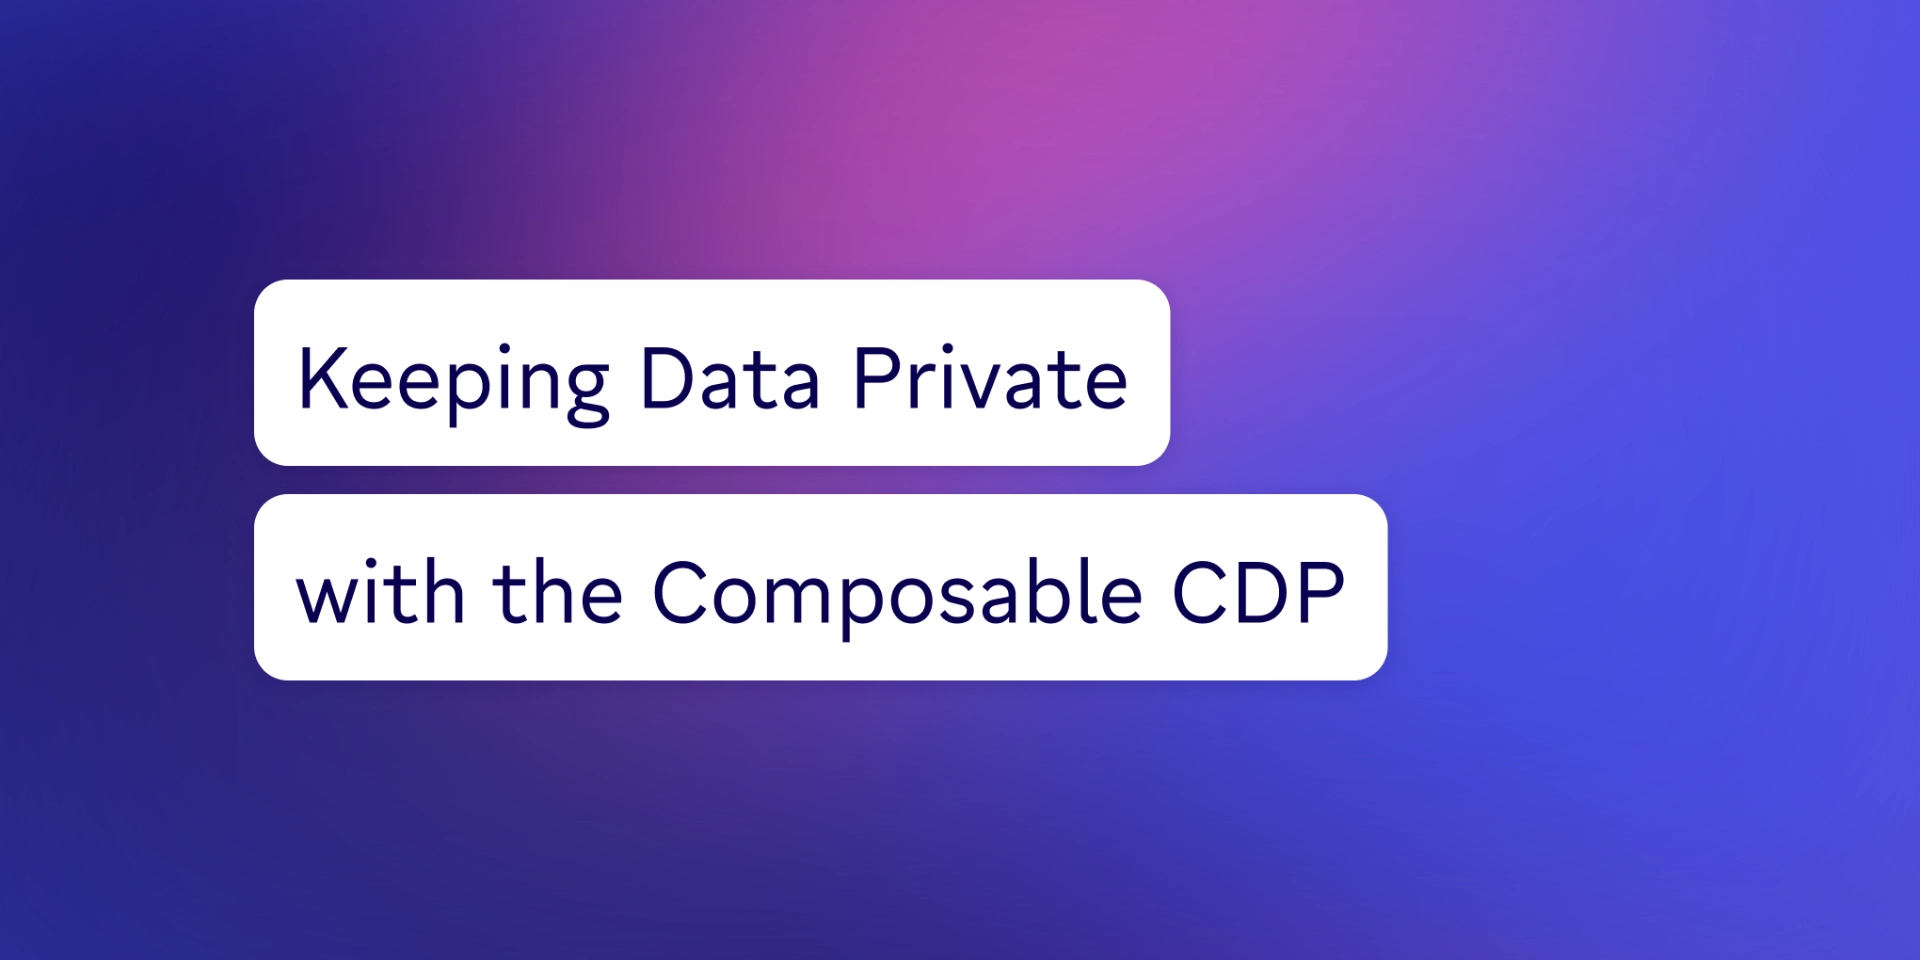 Keeping Data Private with the Composable CDP